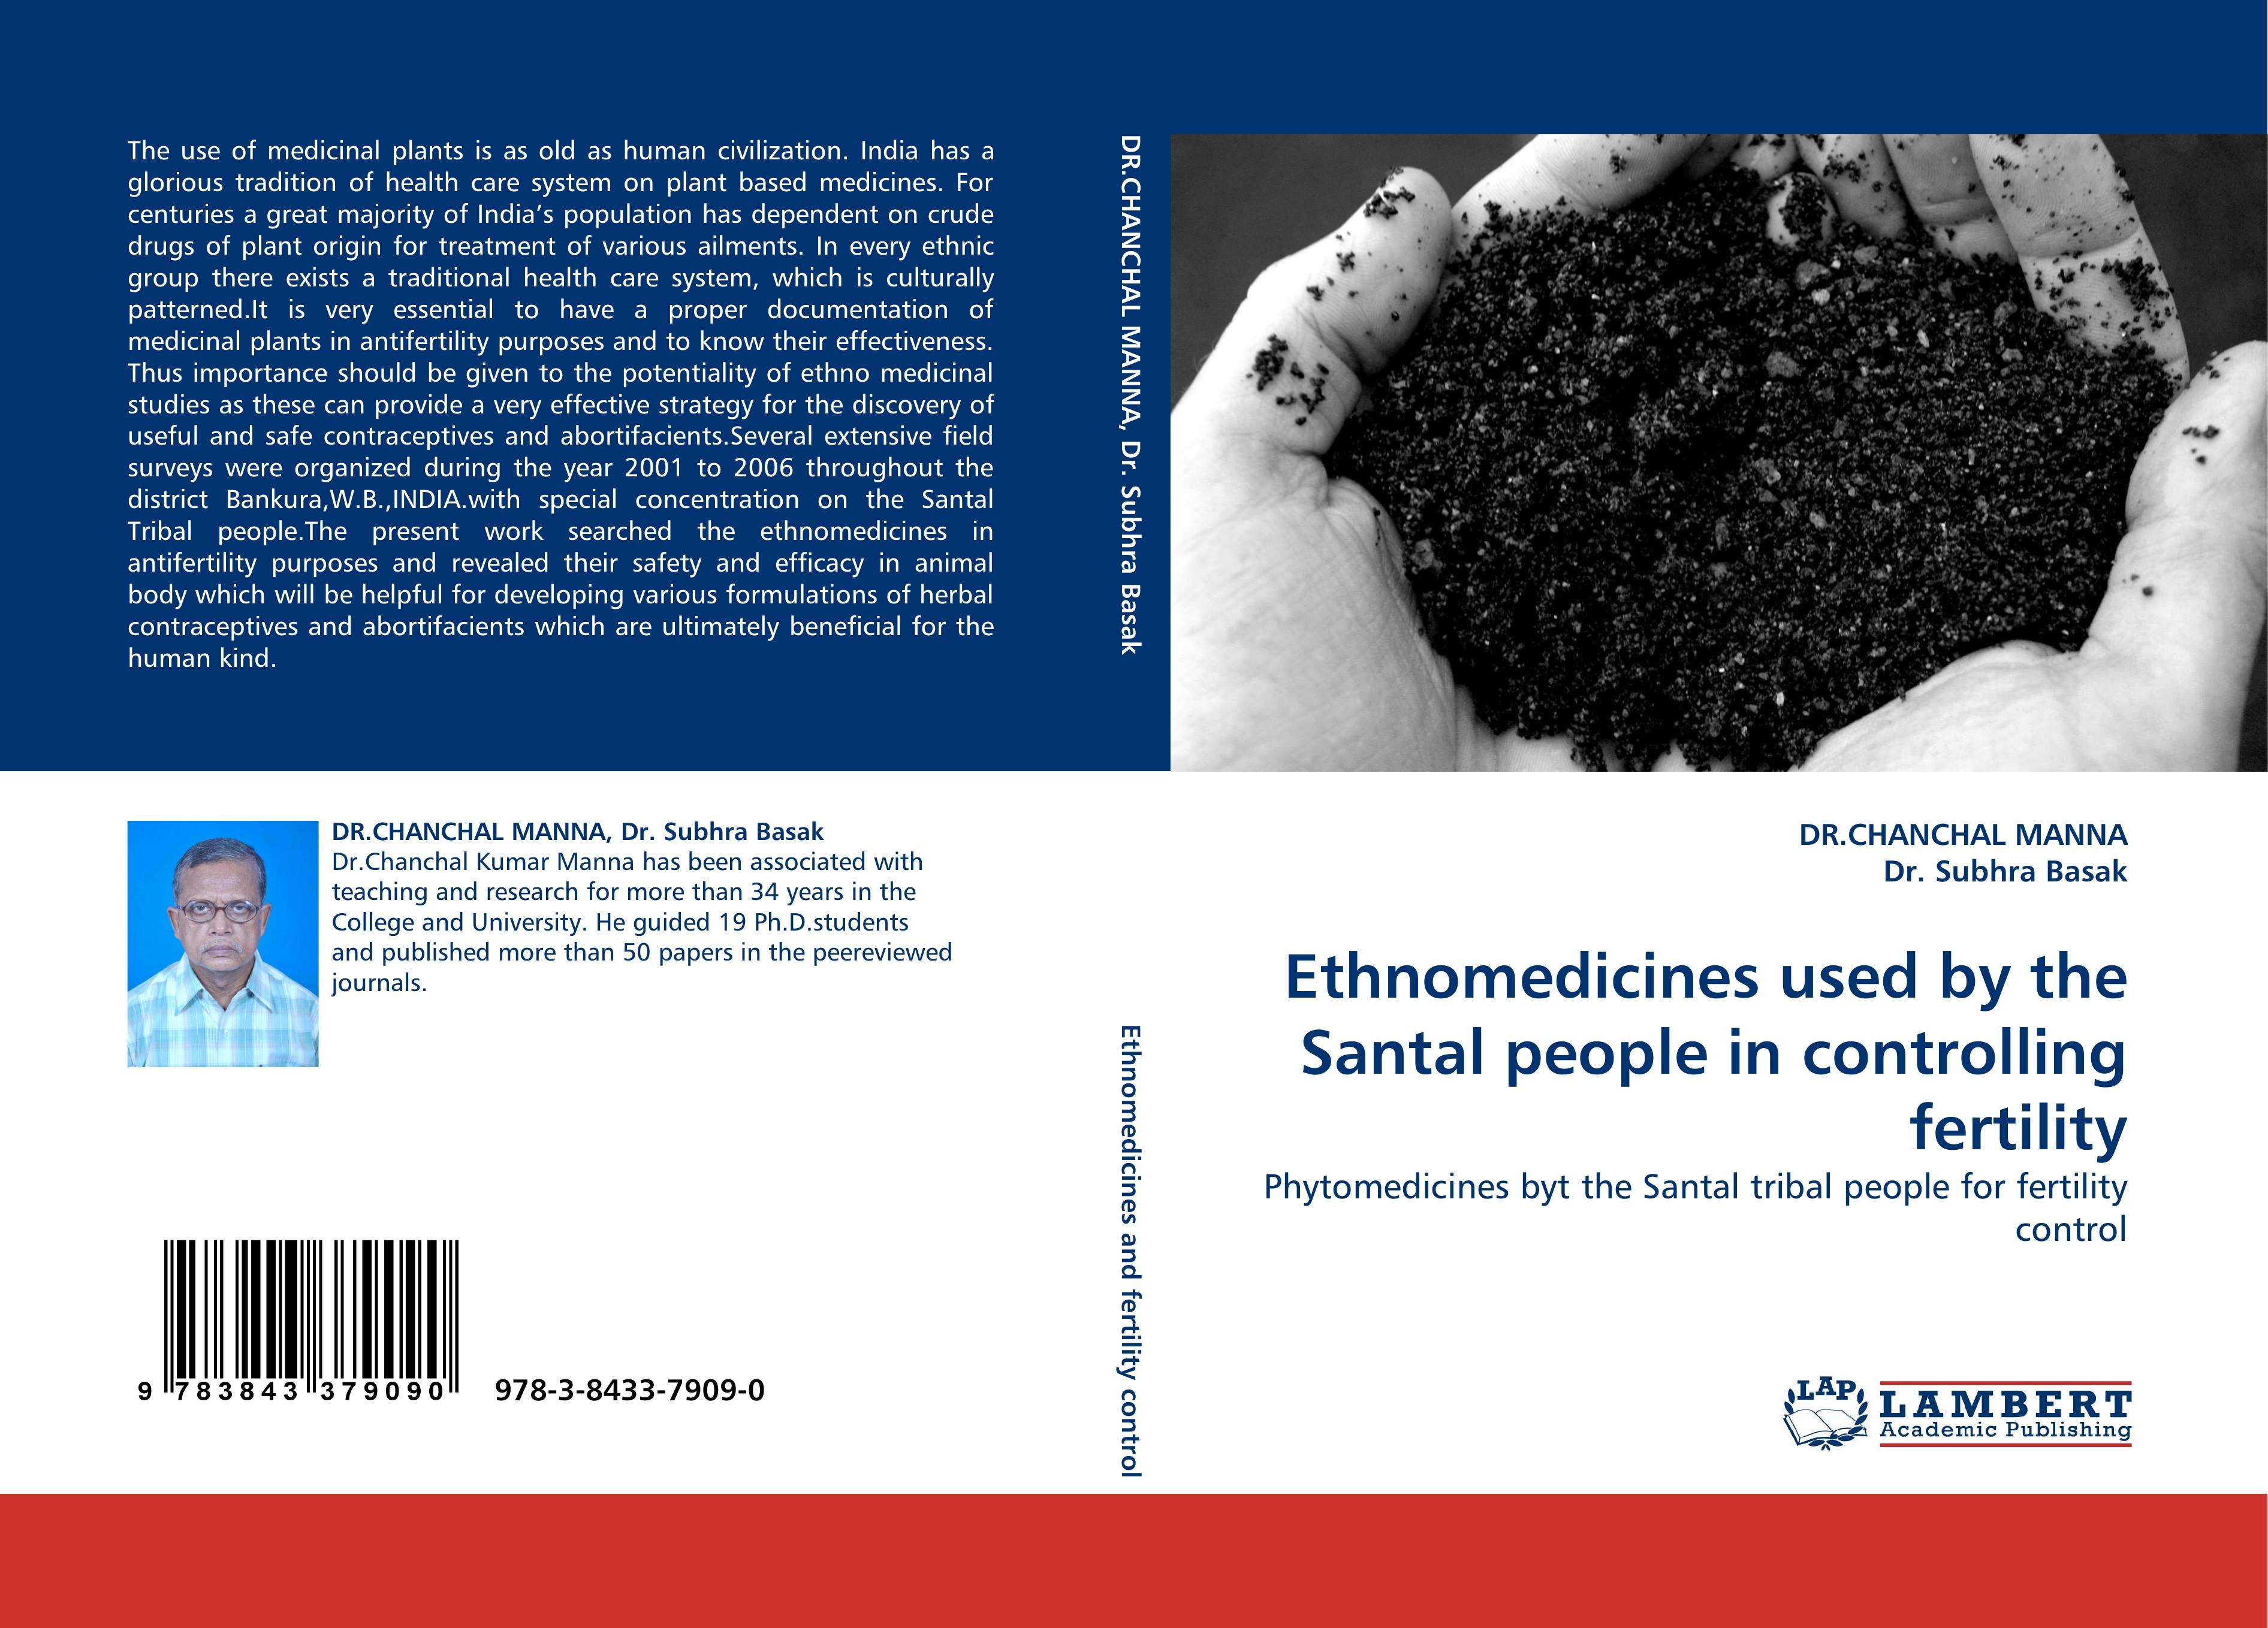 Ethnomedicines used by the Santal people in controlling fertility - DR.CHANCHAL MANNA Dr. Subhra Basak